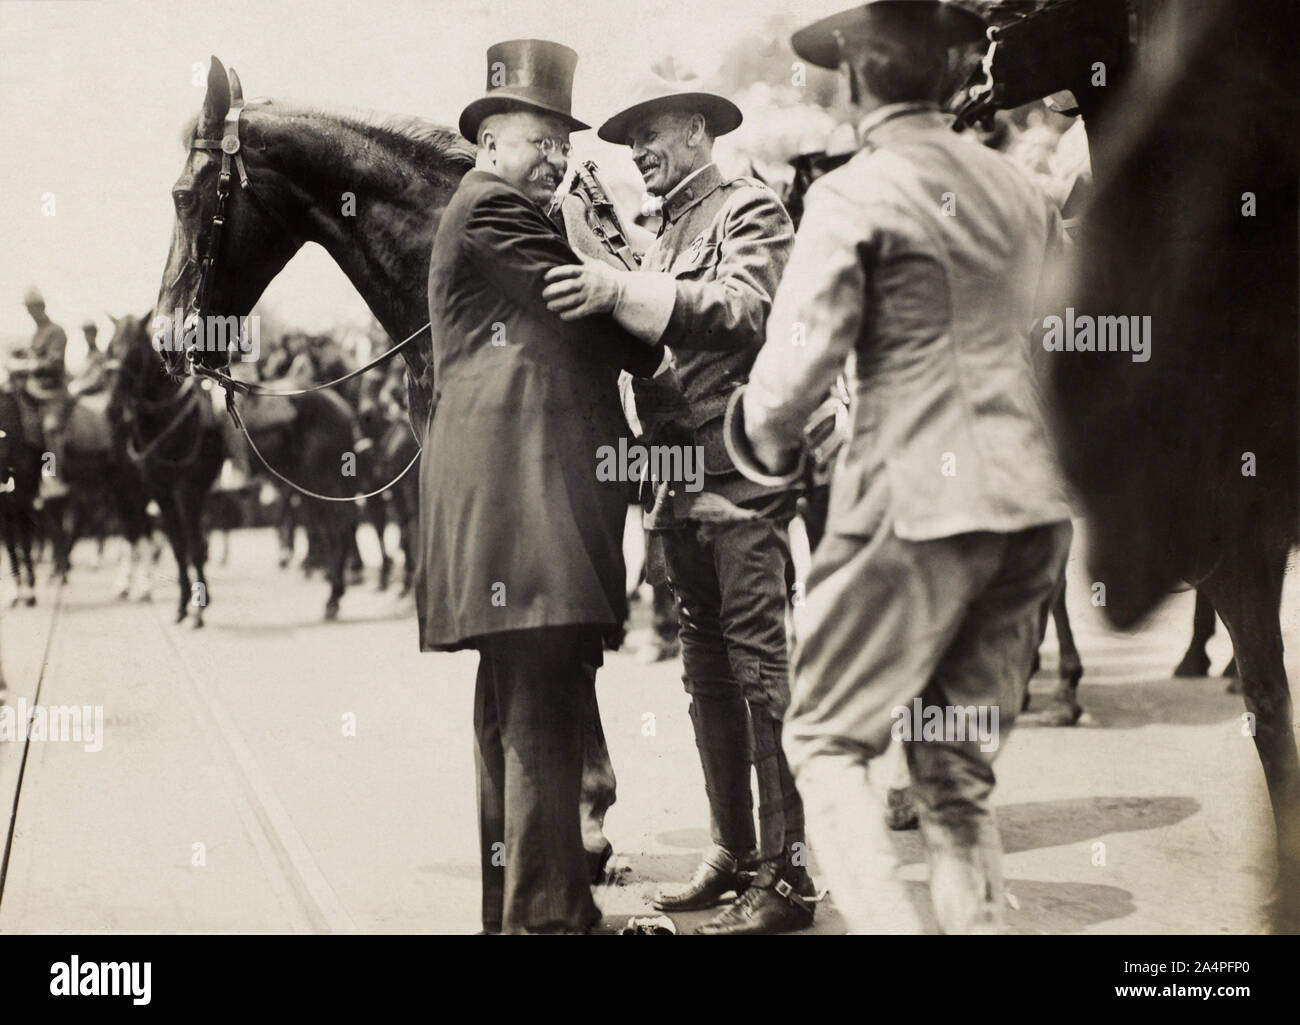 Theodore Roosevelt and Col. Alexander O. Brodie, in Uniform, Greeting each other, Surrounded by Horses, Photograph by Paul Thompson, June 1910 Stock Photo